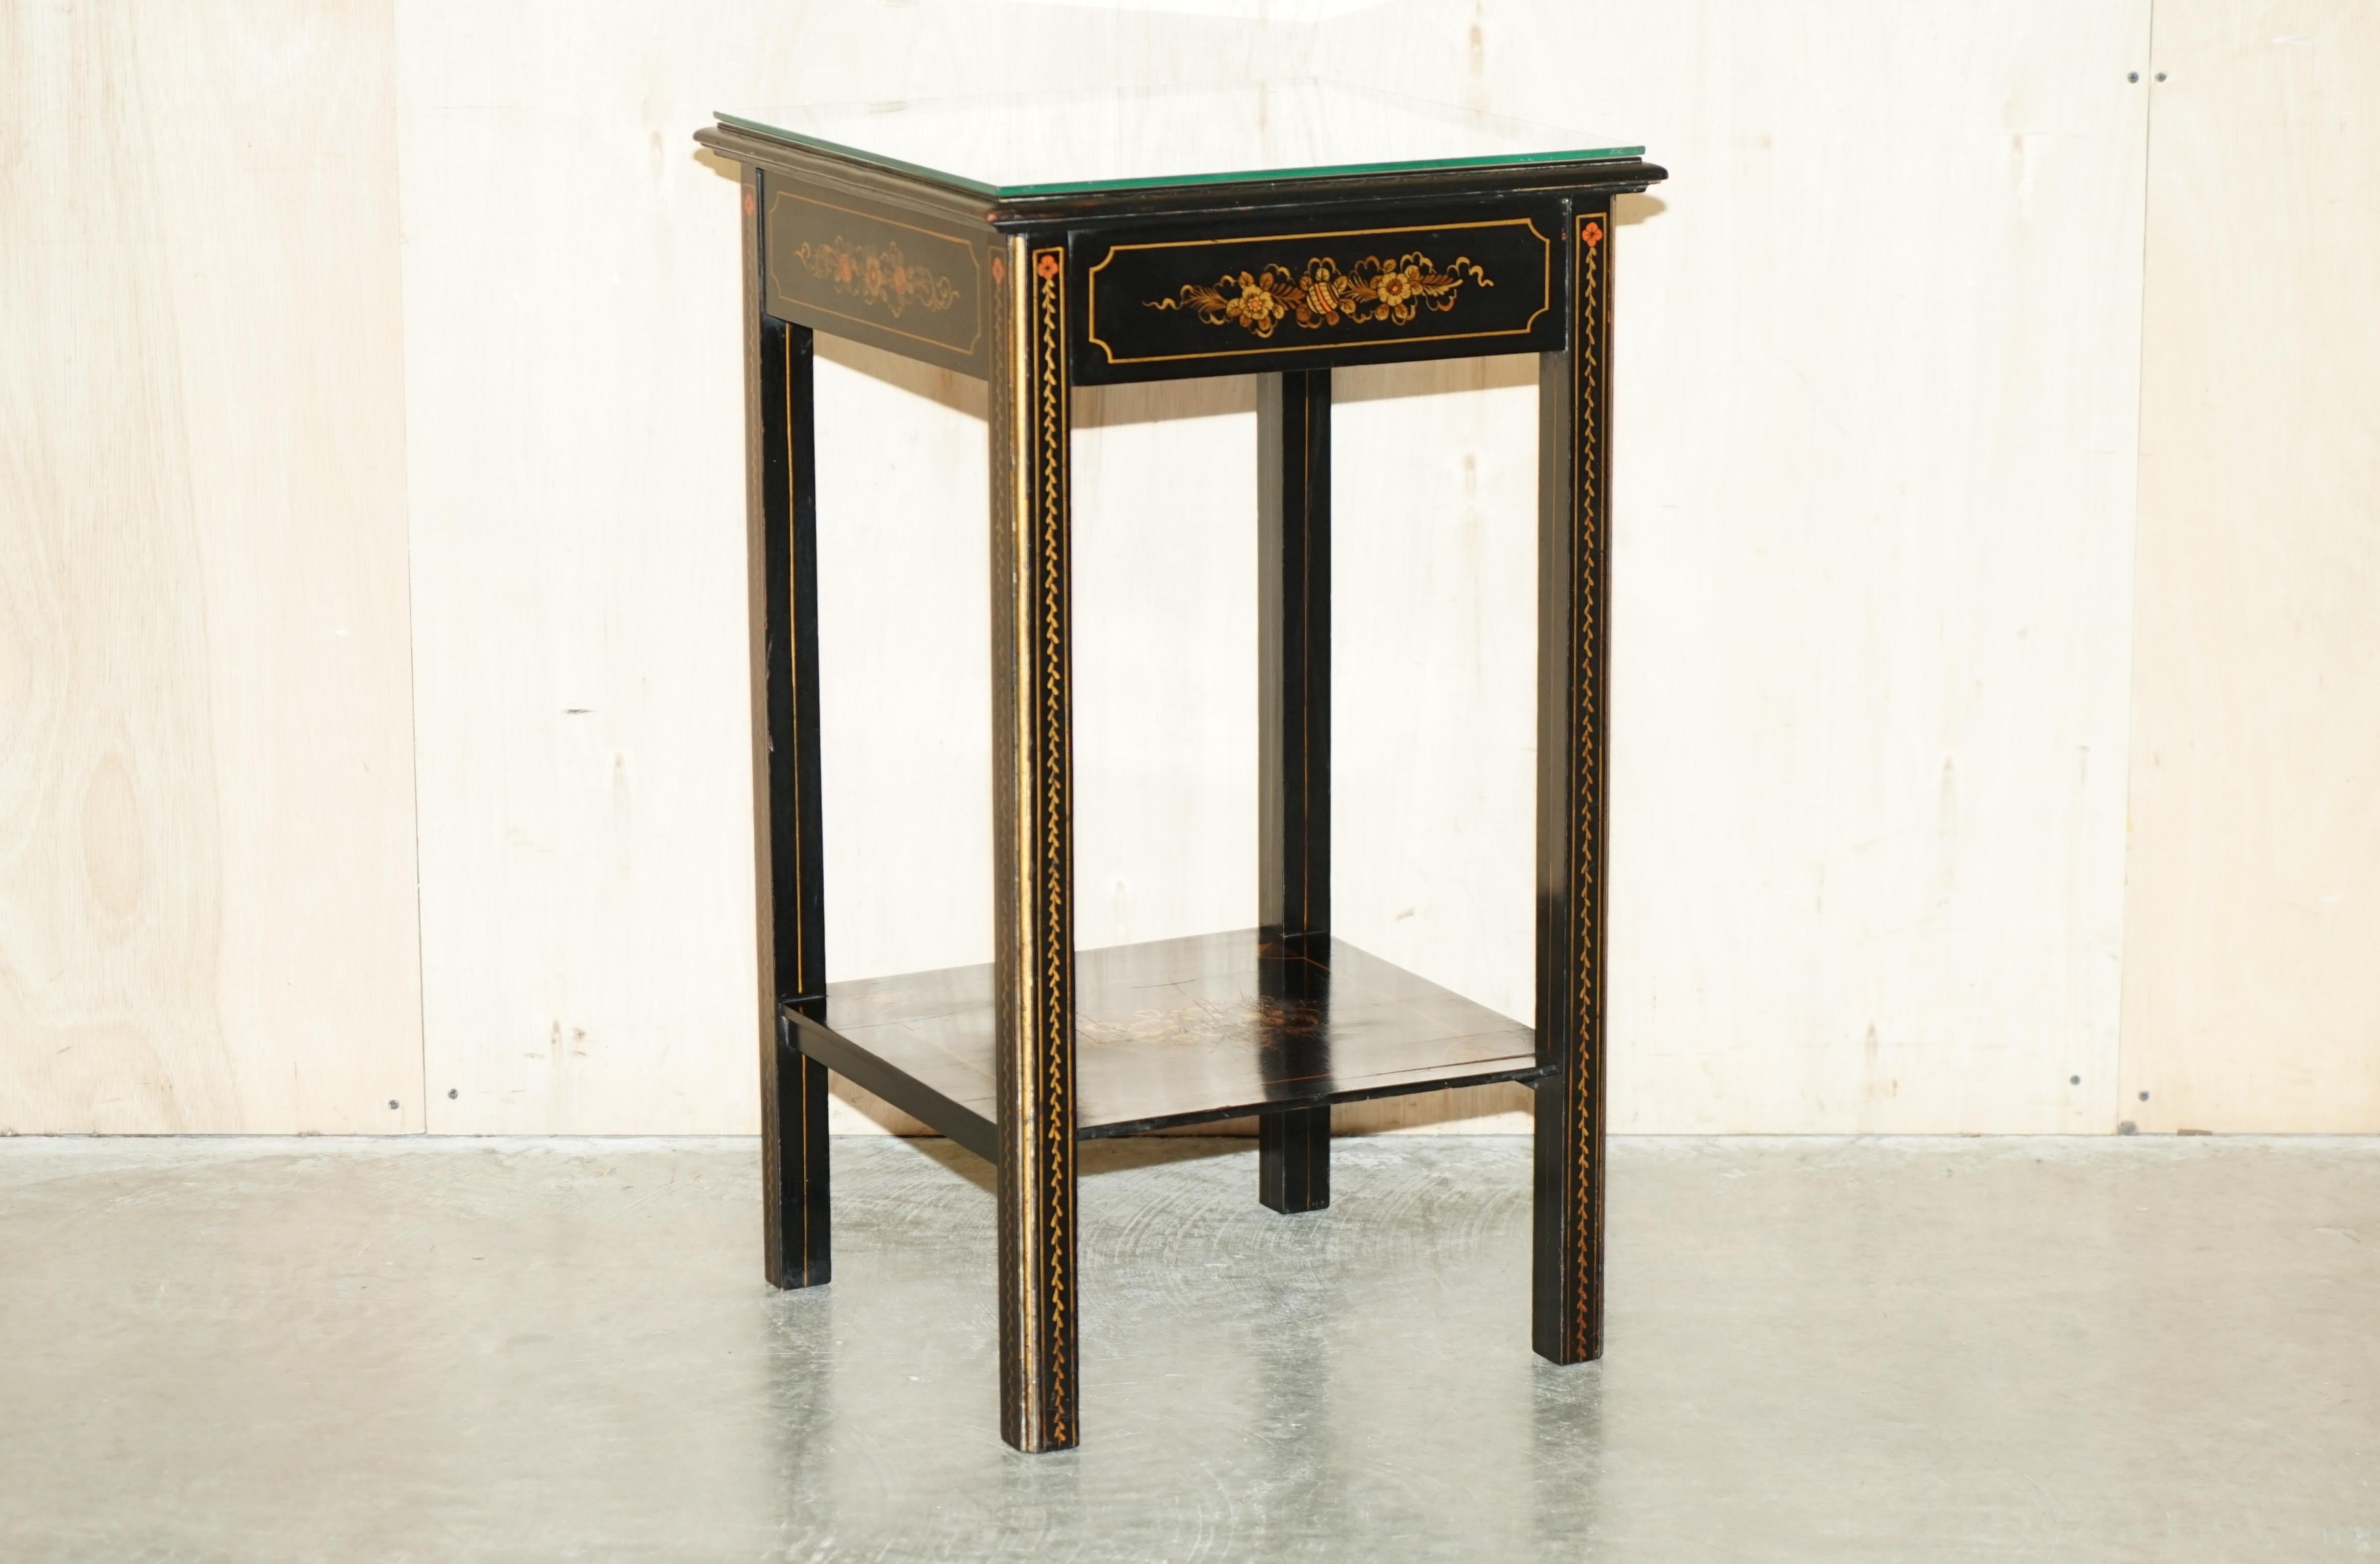 We are delighted to offer for sale this lovely circa 1910 hand made Chinese Chinoiserie side end lamp table.

A very good looking and well made piece, the finish is 100% original and untouched, it looks every bit of its 100-110 years. 

In terms